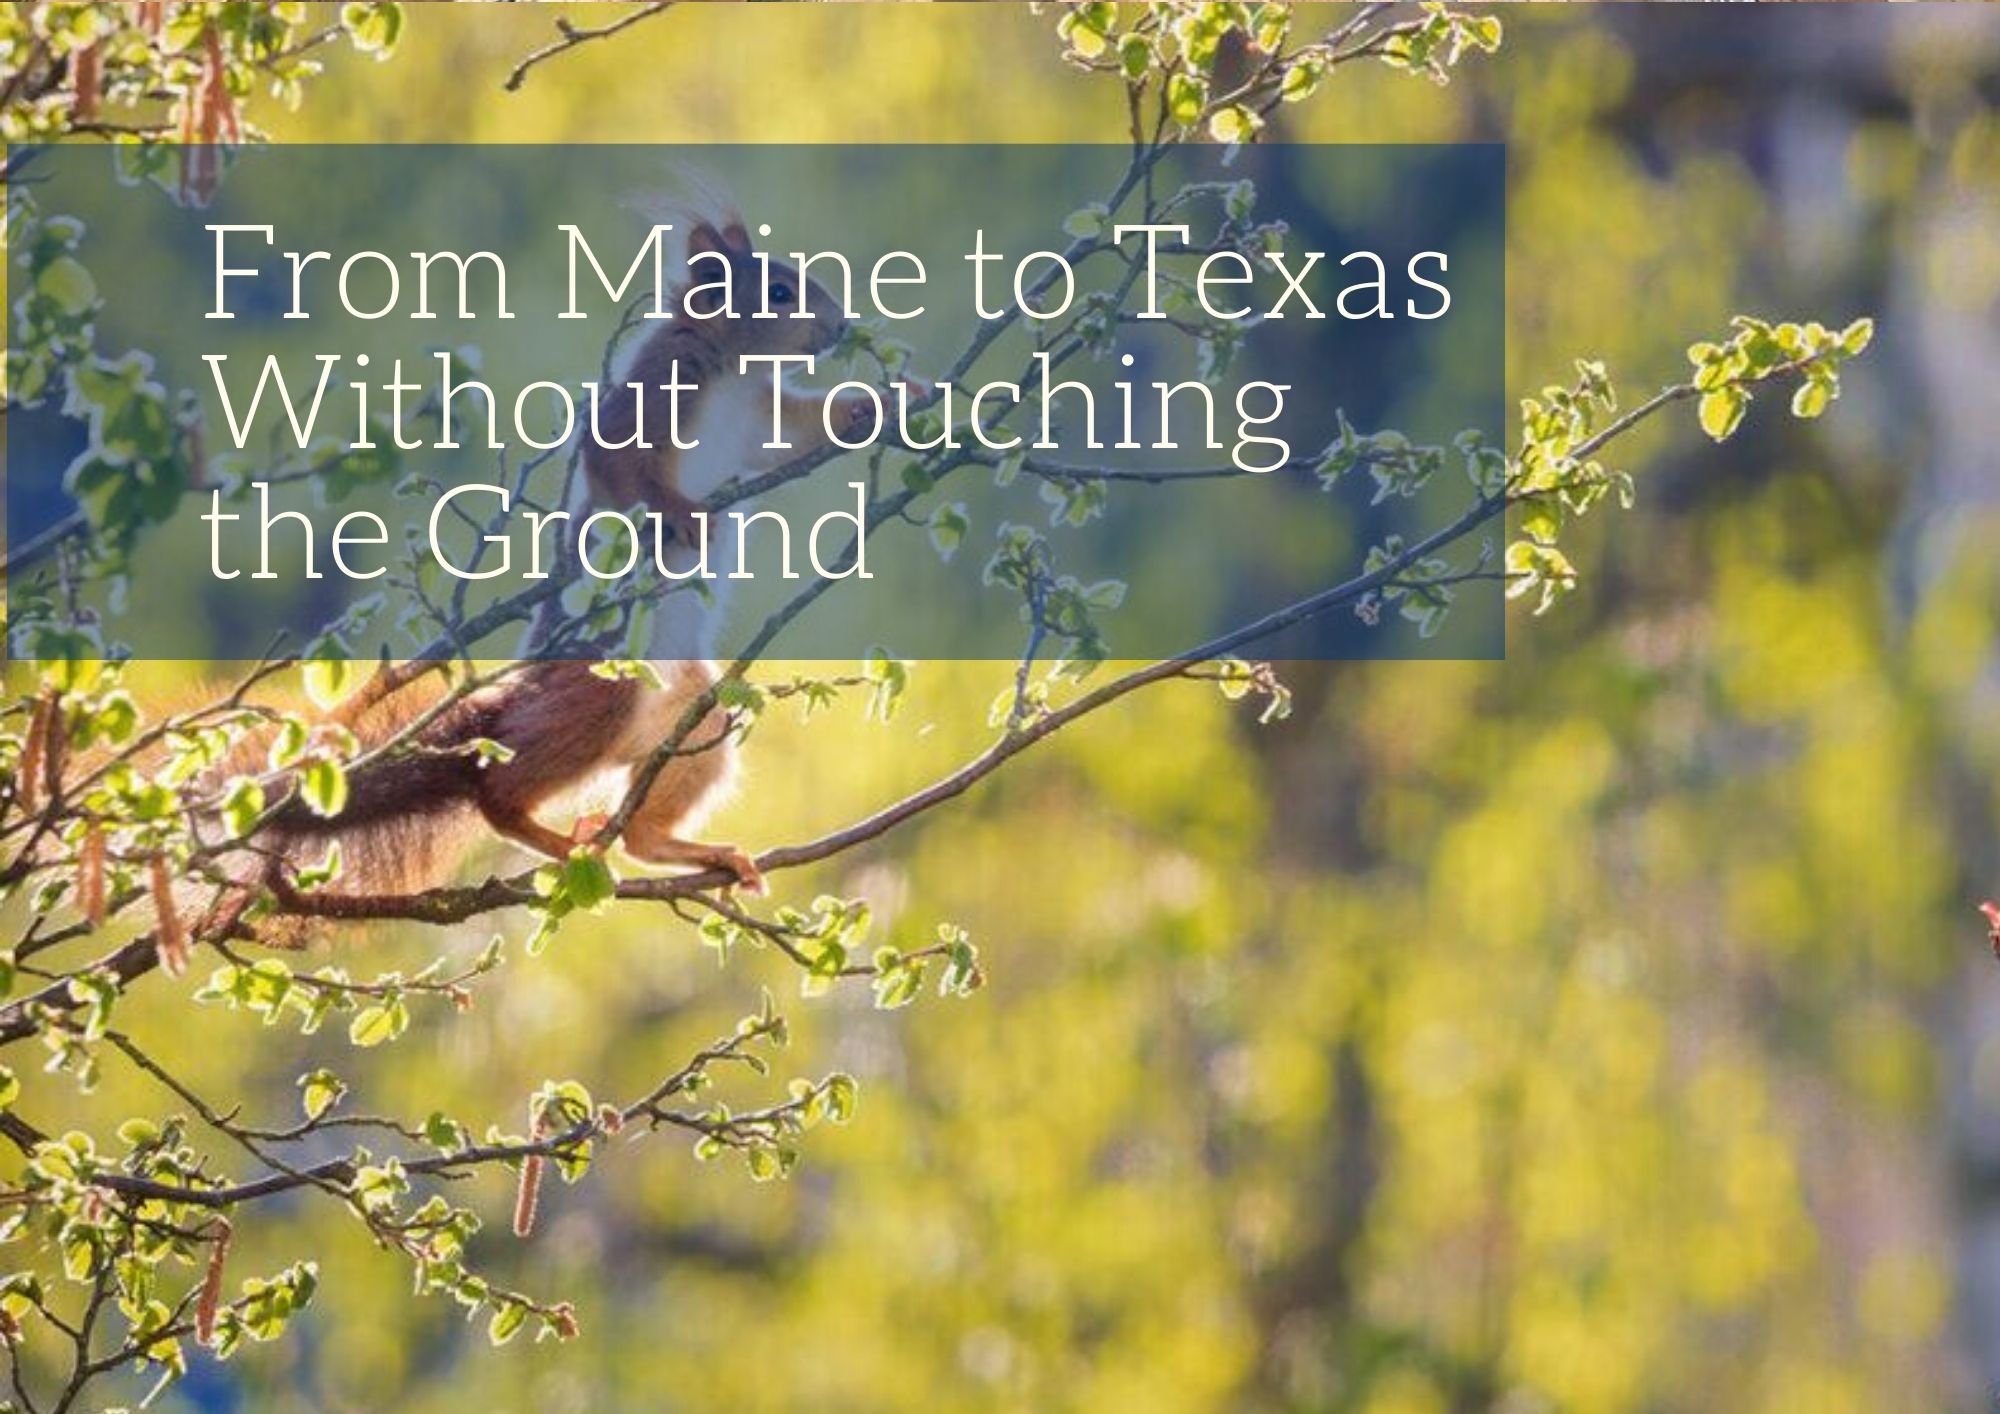 From Maine to Texas Without Touching the Ground